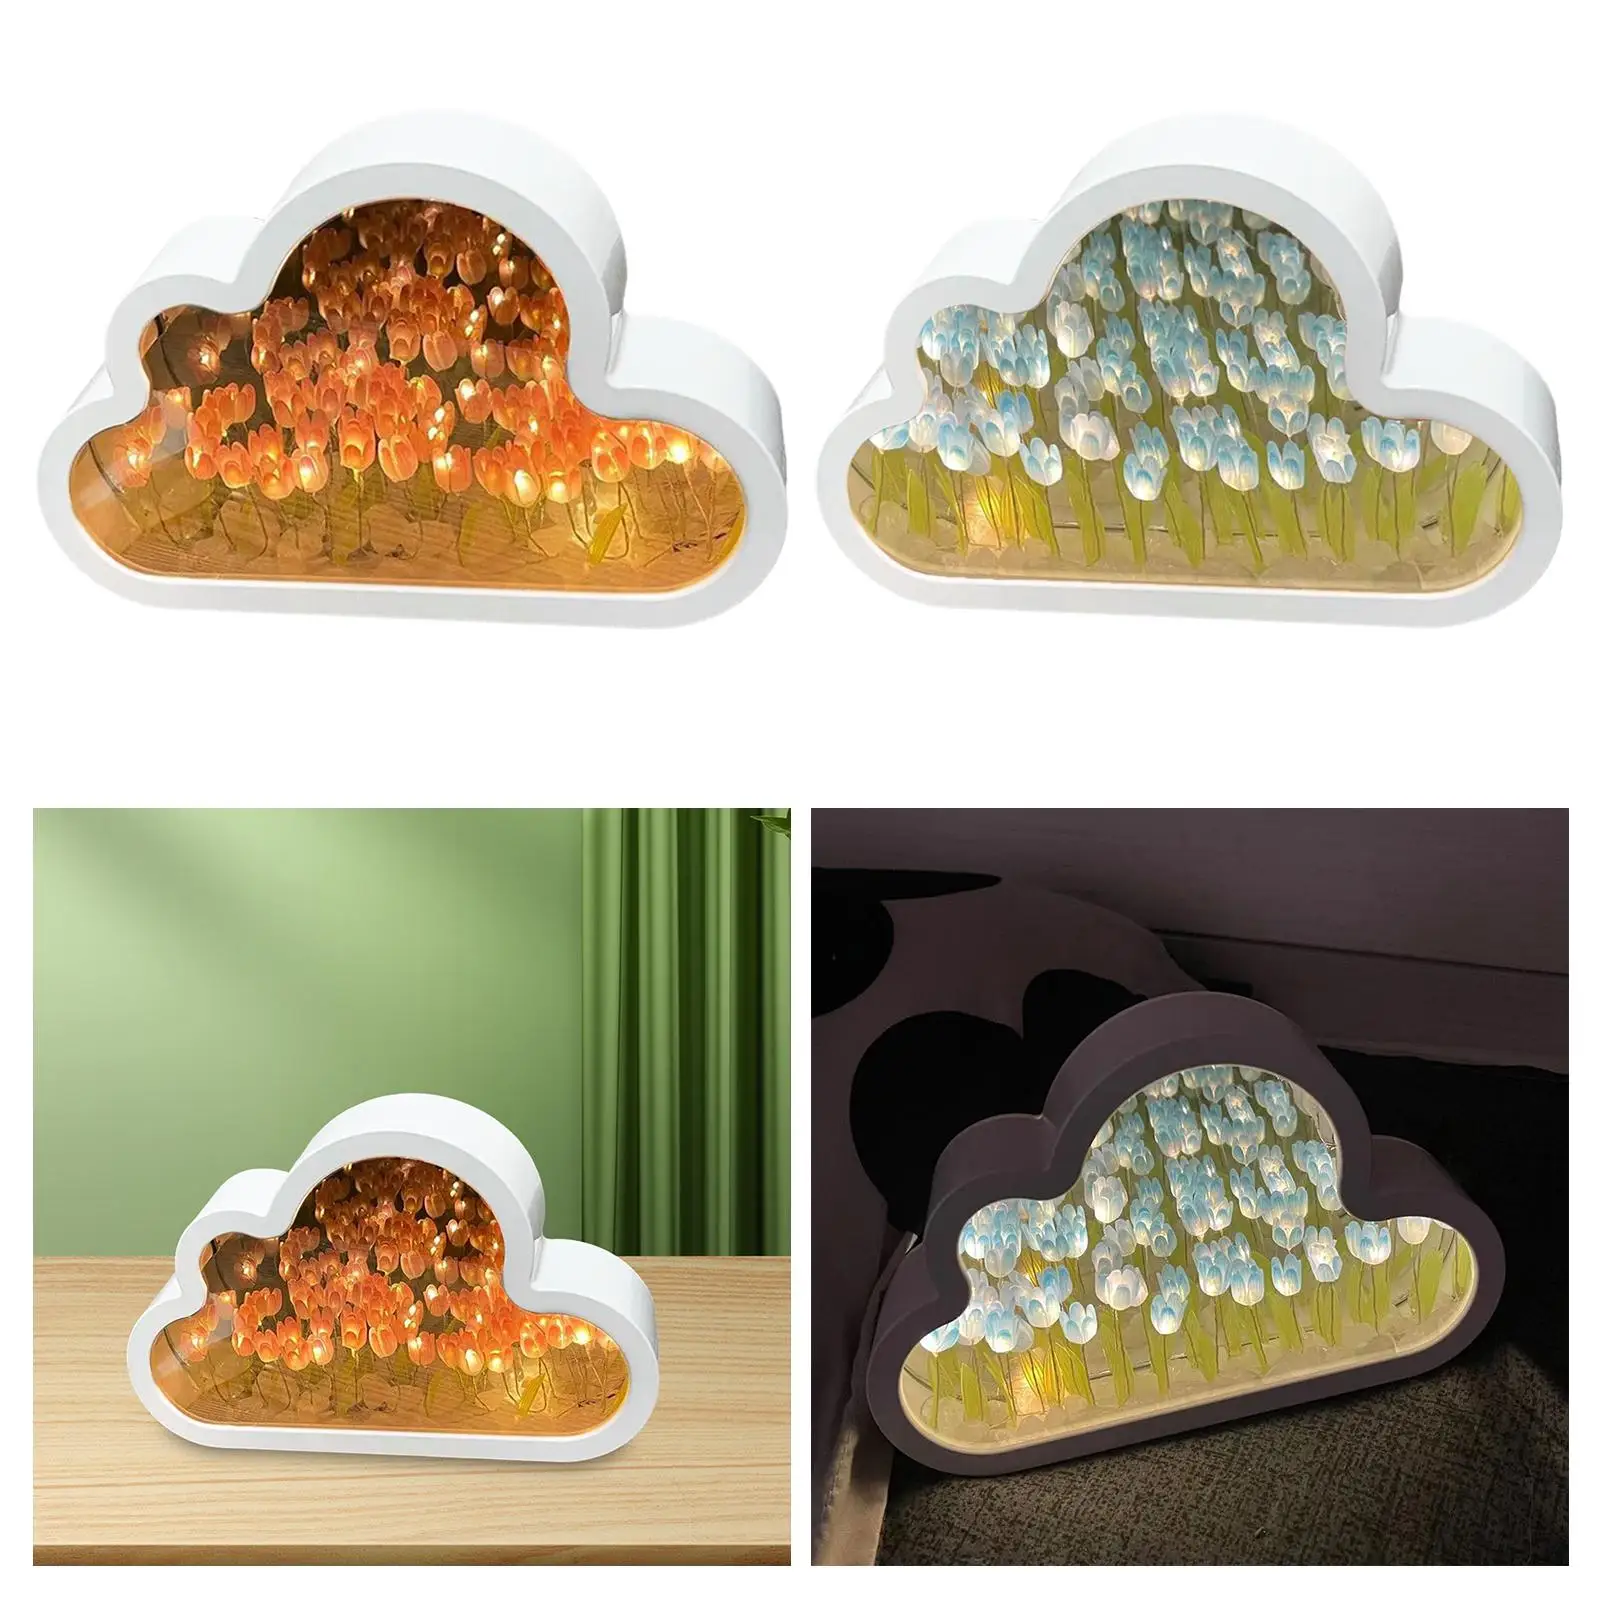 DIY Clouds Night Light Photo Frame Table Lights Small Night Light Table Lamps for Holiday Party Living Room Desktop Gifts